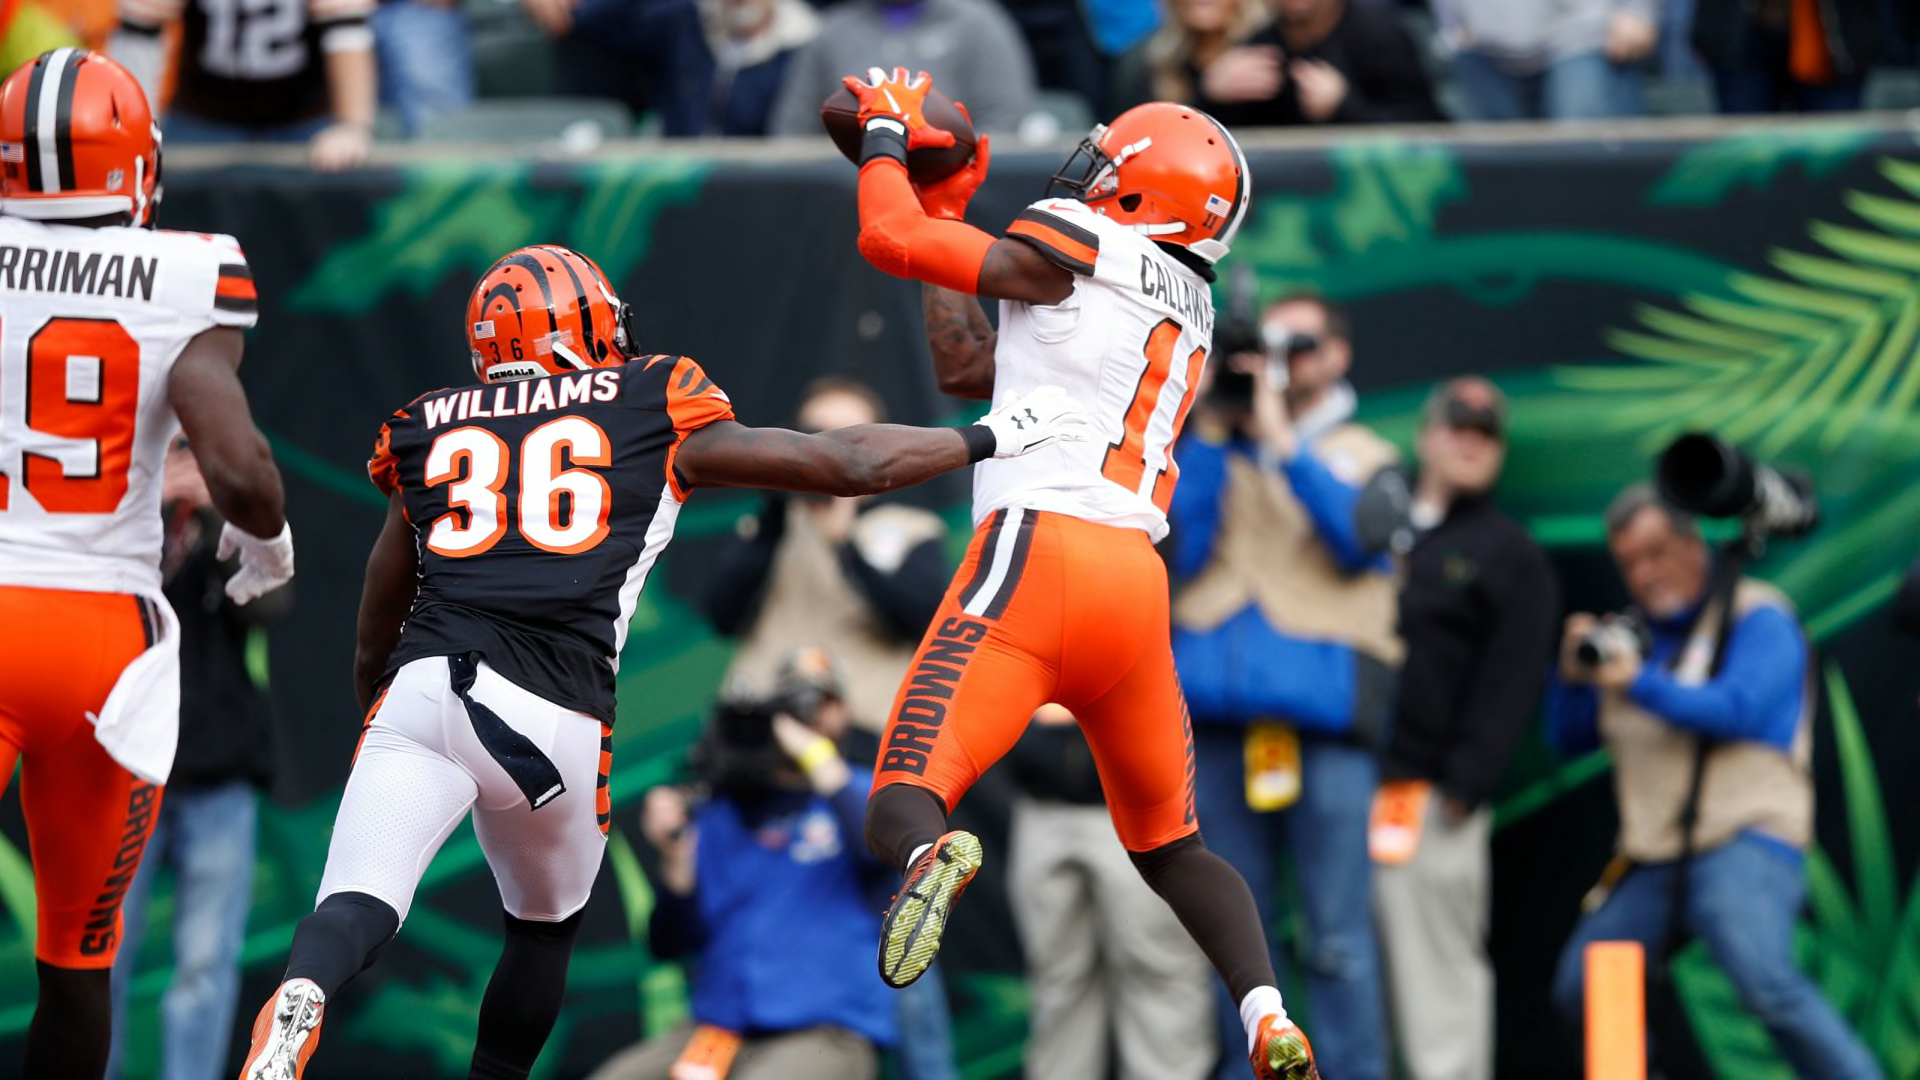 Cleveland Browns vs. Bengals, Week 16: Live stream, channel, game info - What Local Channel Is The Bengals Game On